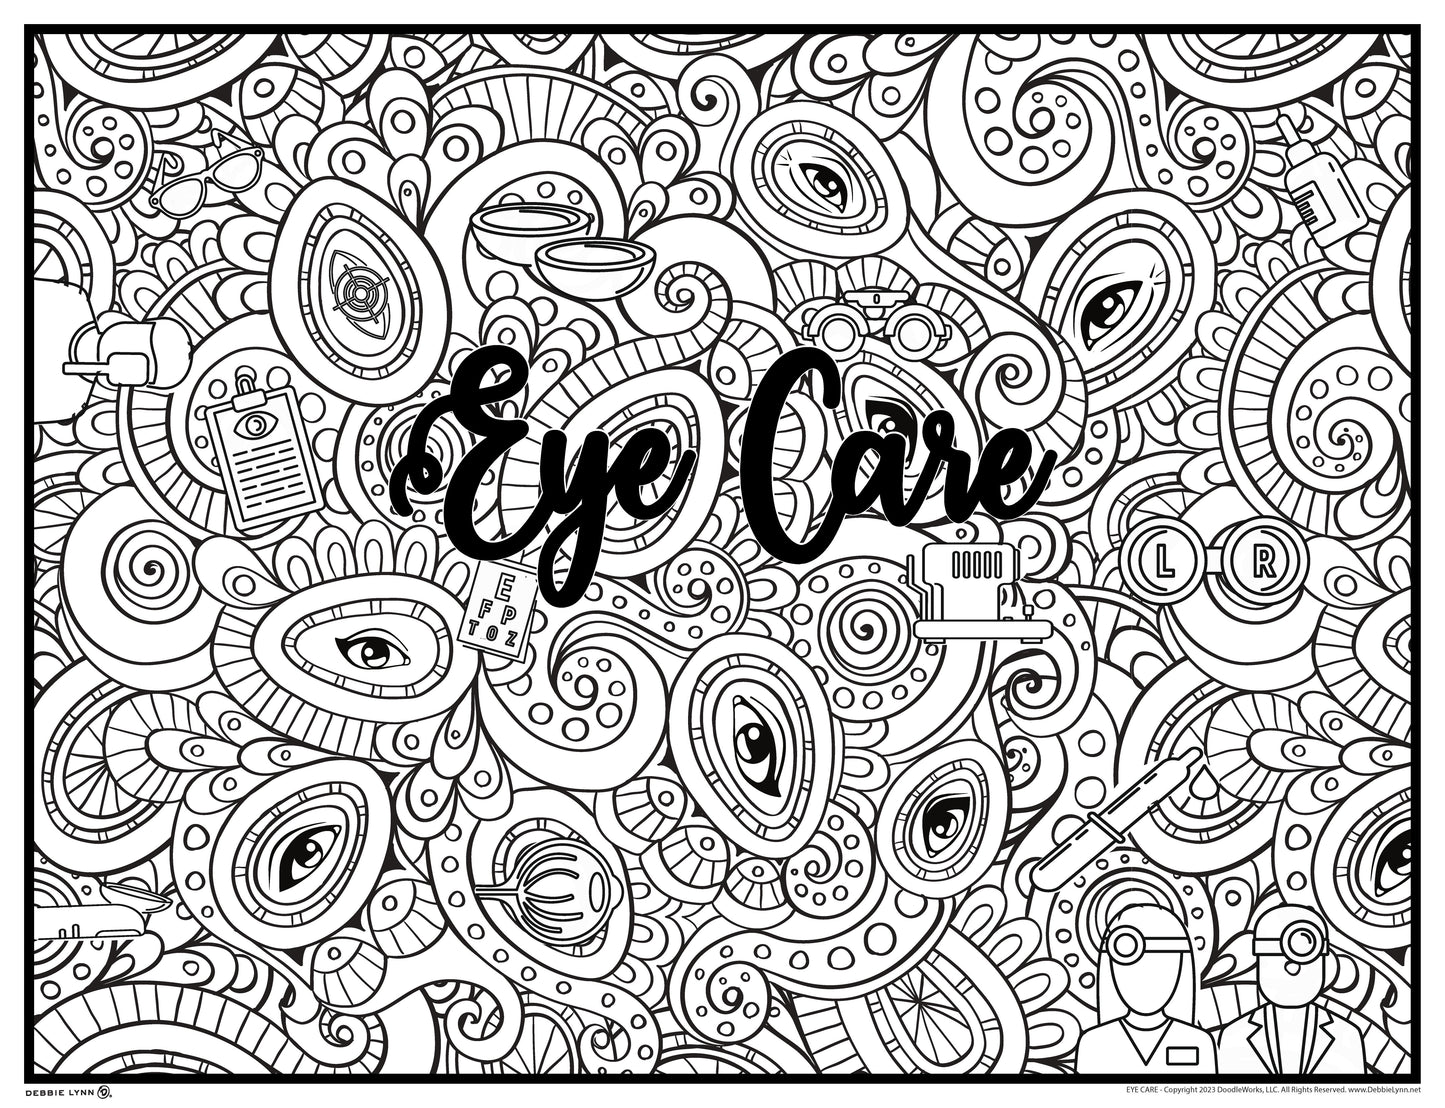 Eye Care Personalized Giant Coloring Poster 46" x 60"